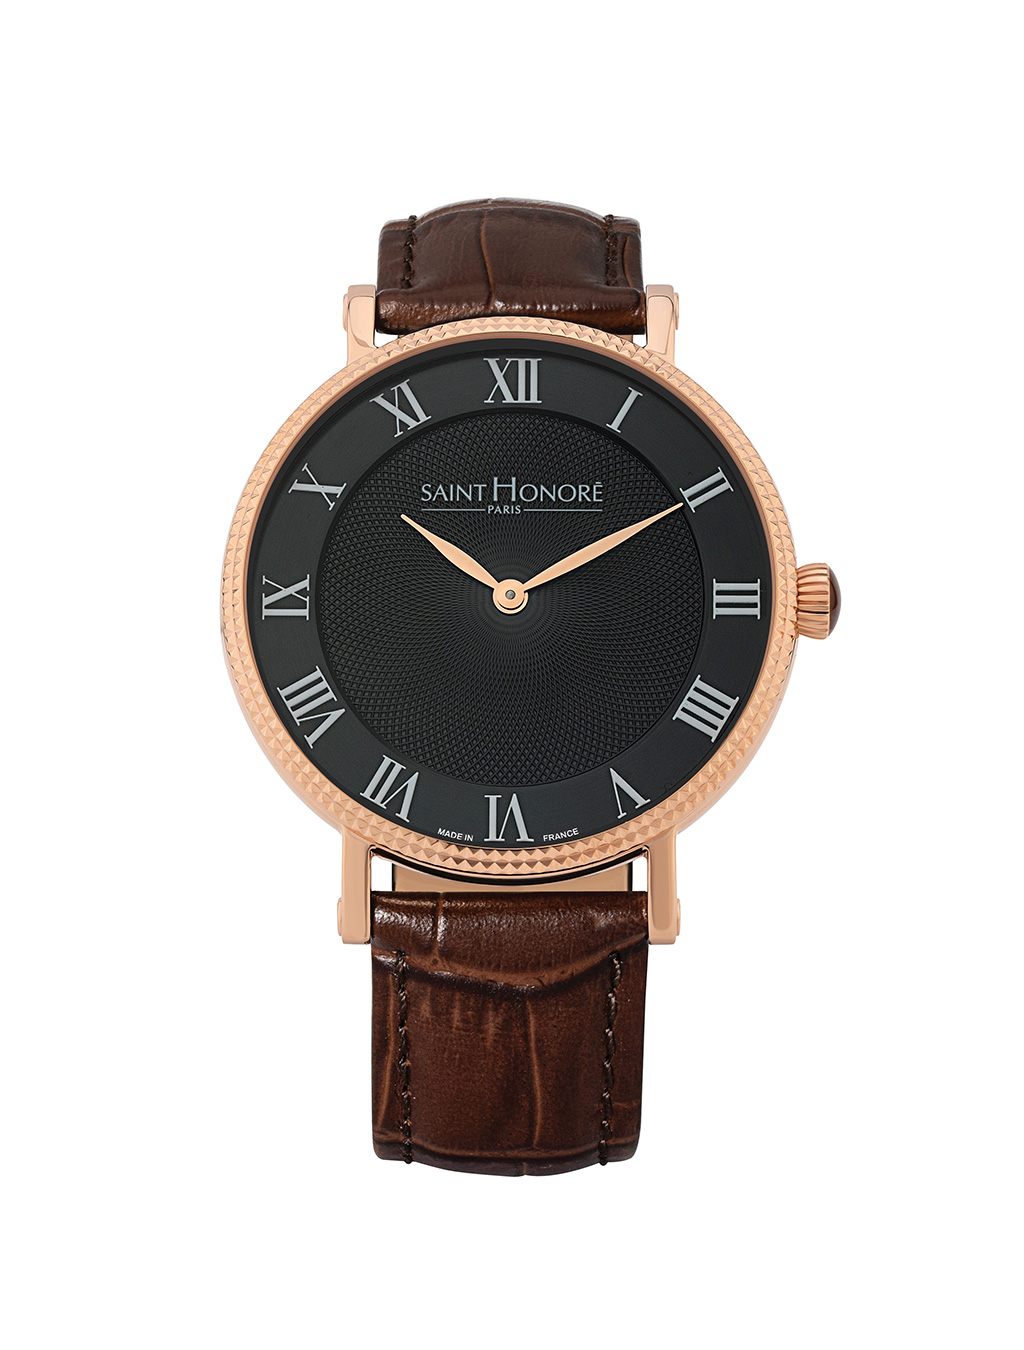 TROCADERO Men's watch - ion plating rose gold case, brown dial, brown leather strap